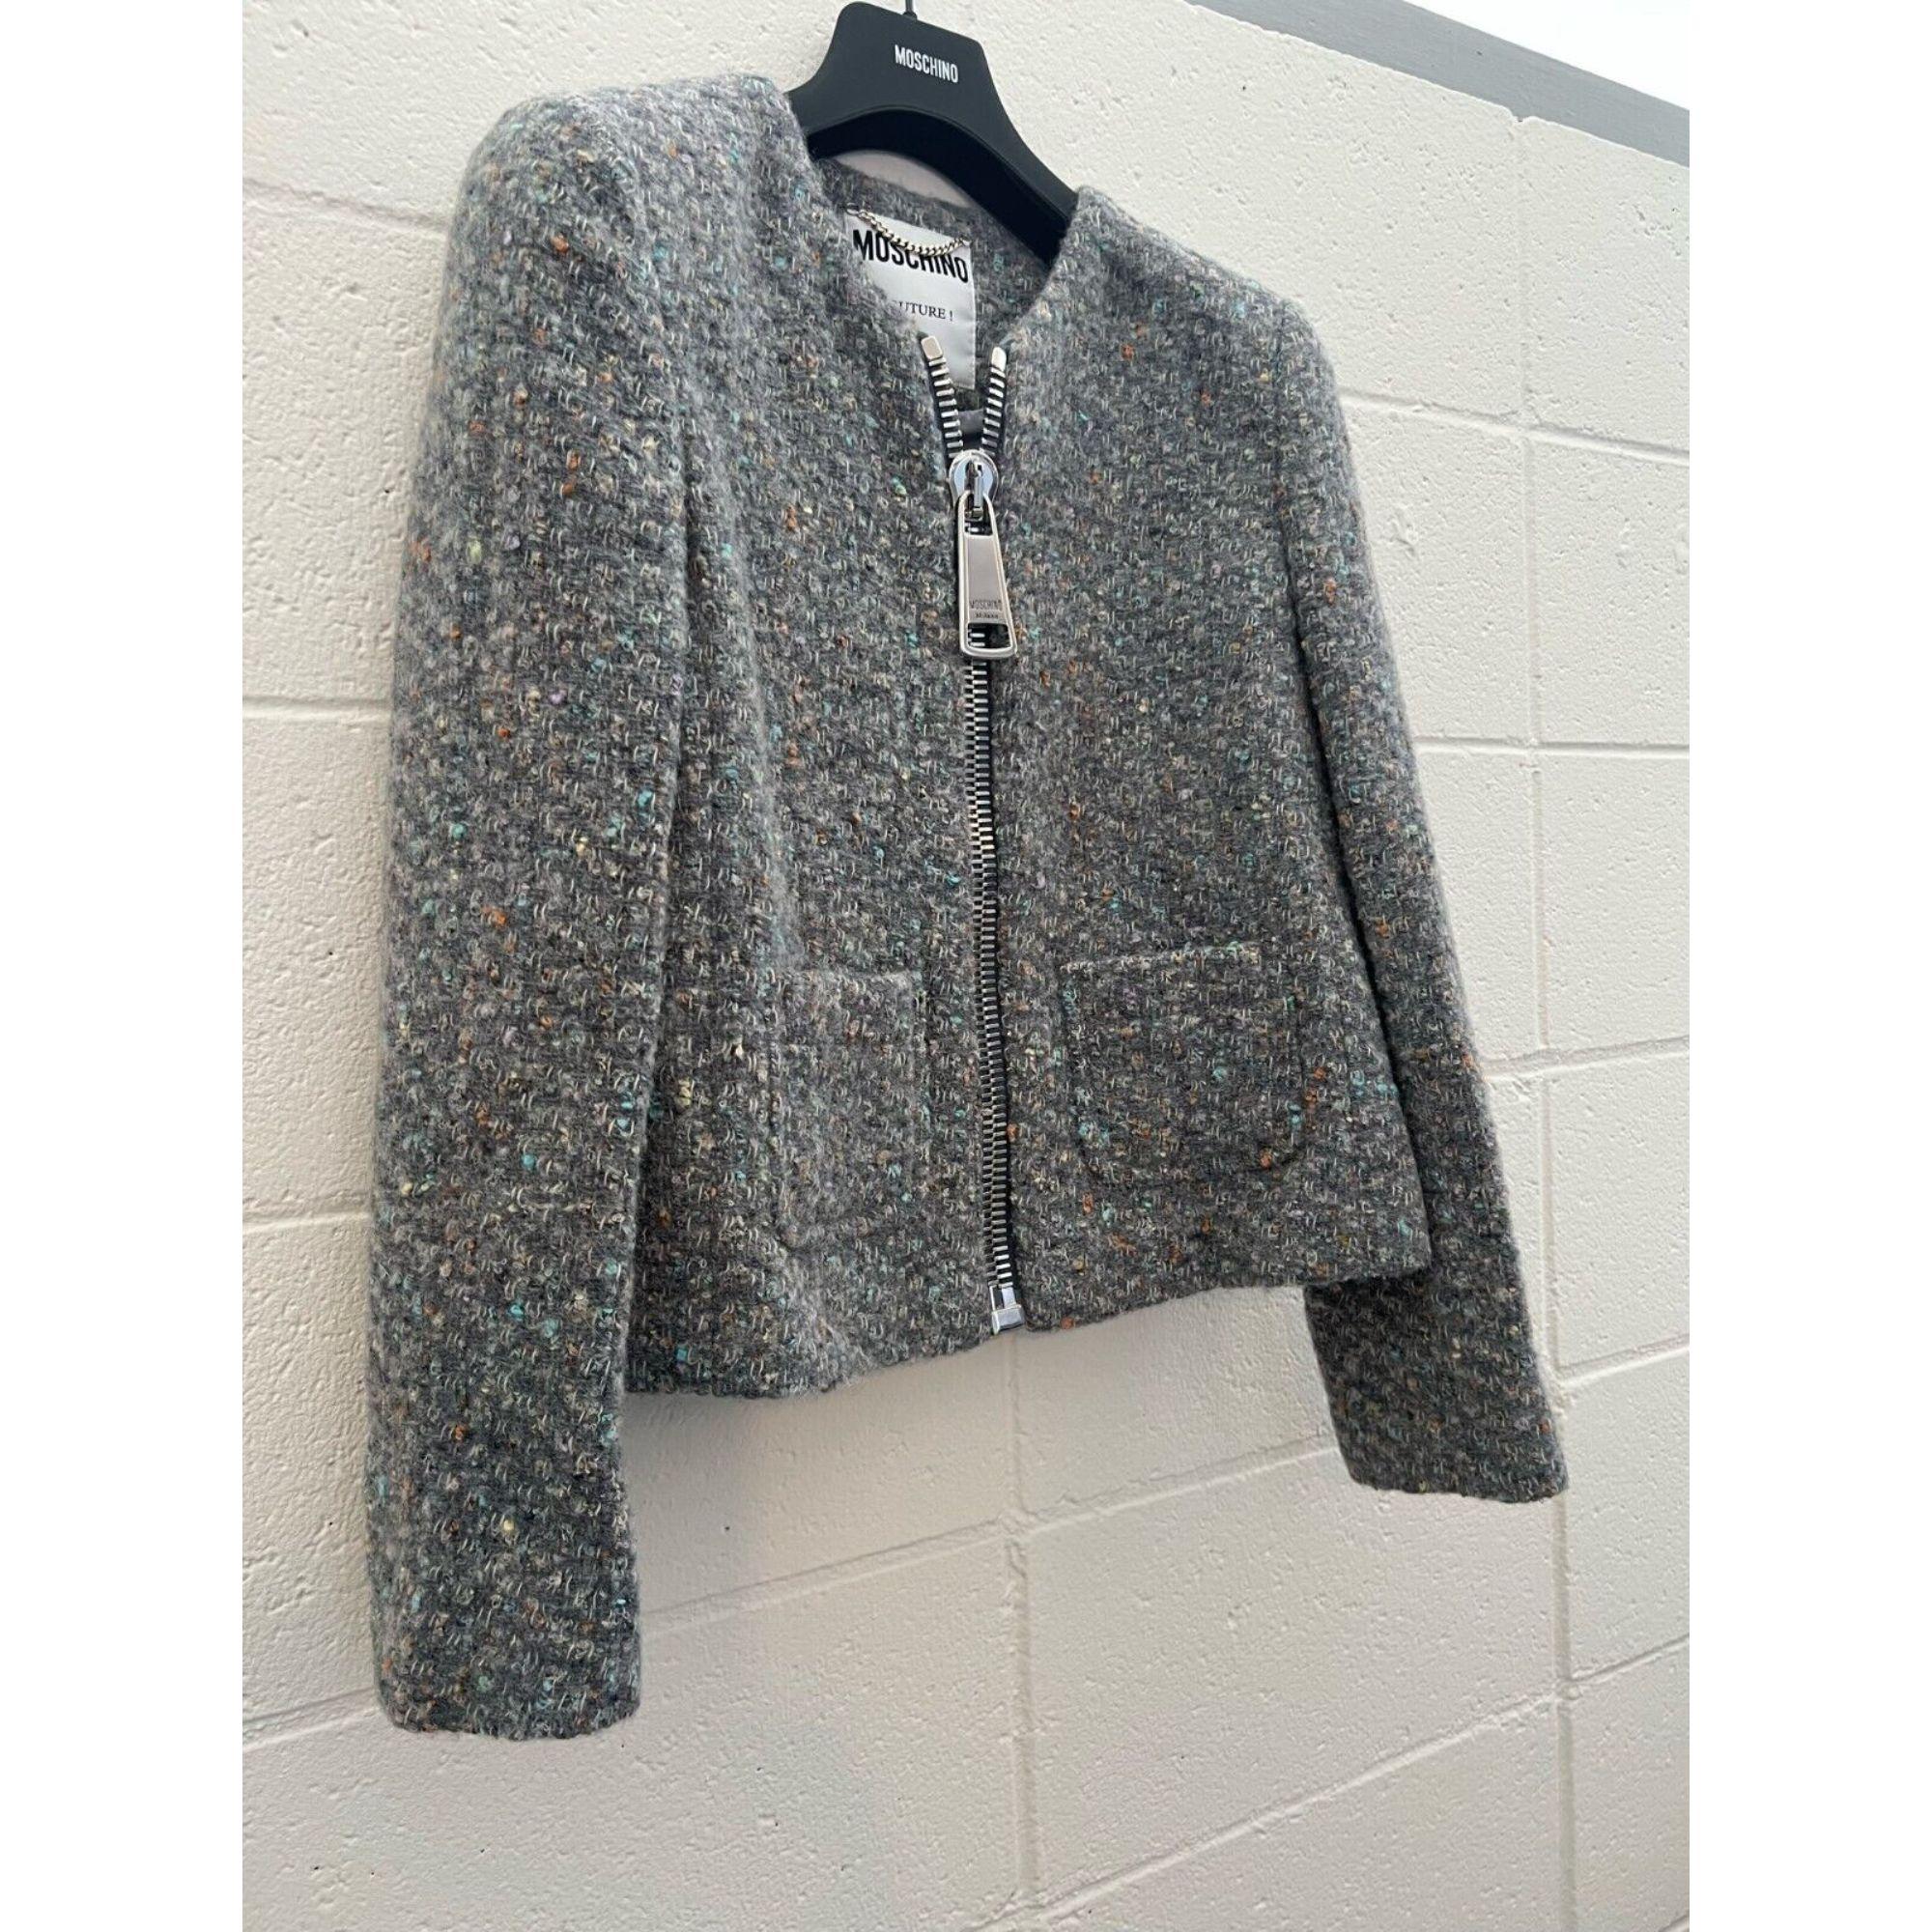 AW20 Moschino Couture Boucle Wool Jacket by Jeremy Scott, Size US 10 For Sale 3